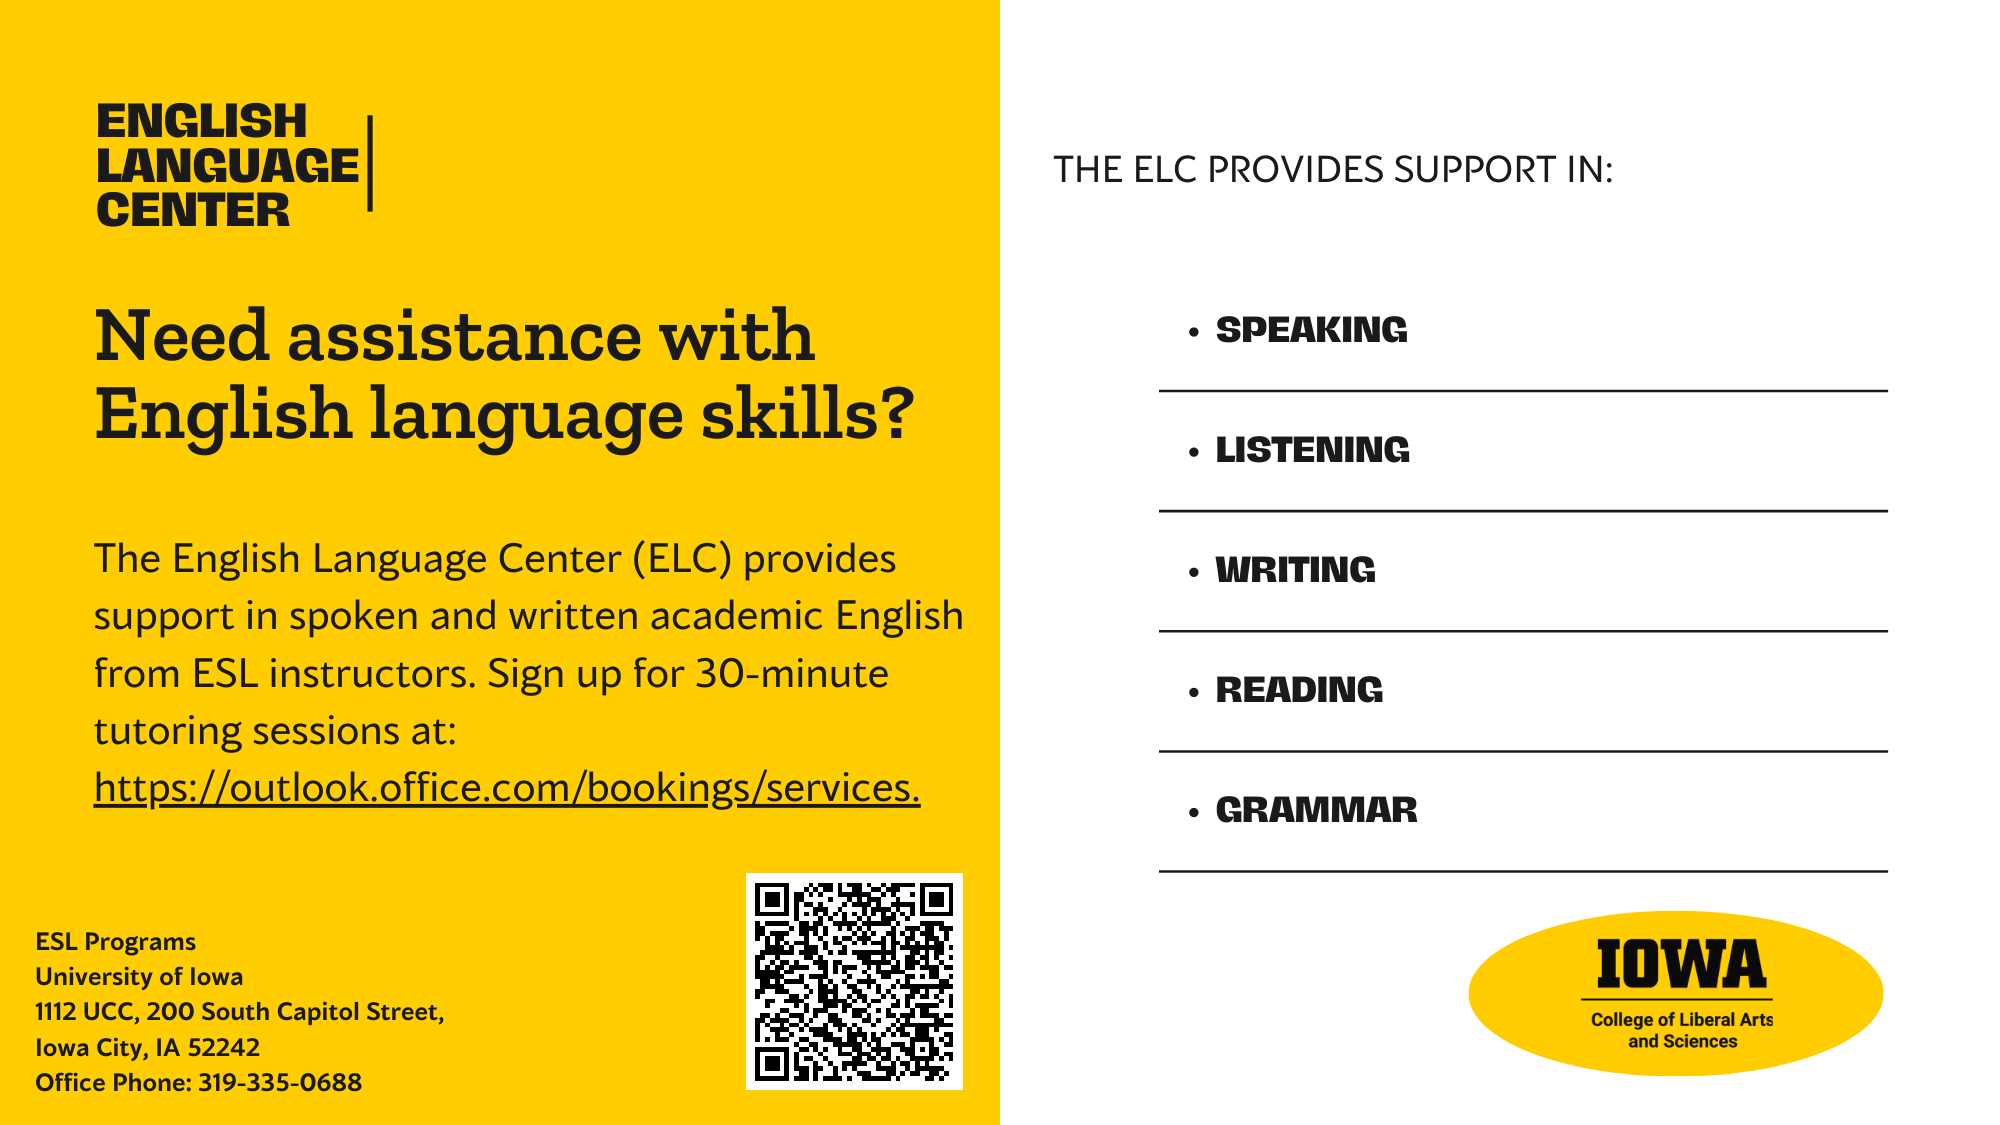 the English Language Center is providing 30-minute tutoring sessions to support those learning English